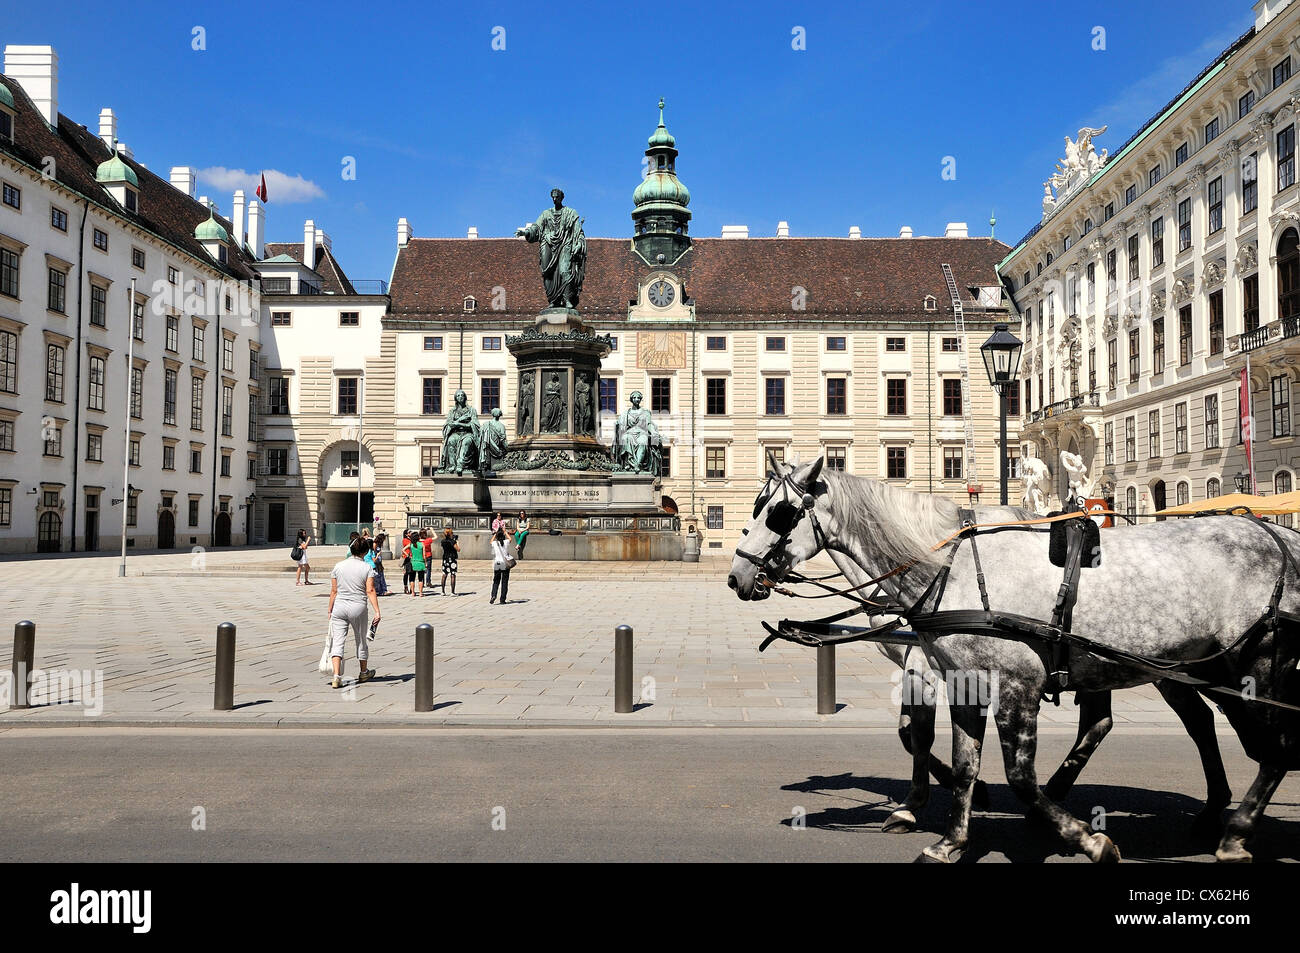 Hofburg palace with horses in foreground, centre of old historic Vienna Austria Europe Stock Photo